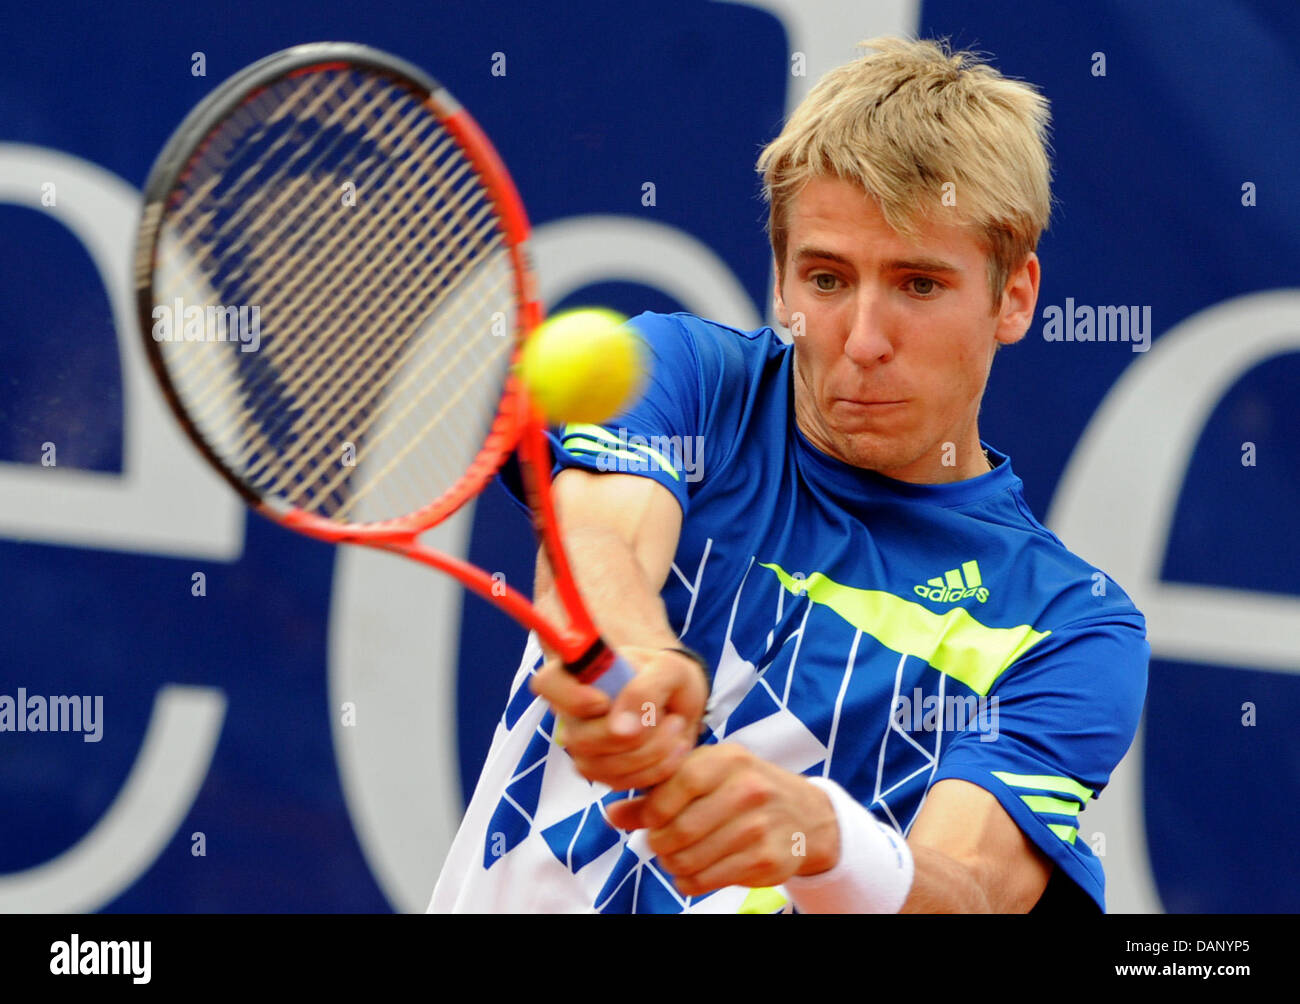 Cedrik-Marcel Stebe from Germany plays during the quarter-finale match in  the ATP tennis tournament against Andujar from Spain at Weissenhof in  Stuttgart, Germany, 15 July 2011. Ferrero won in two sets by